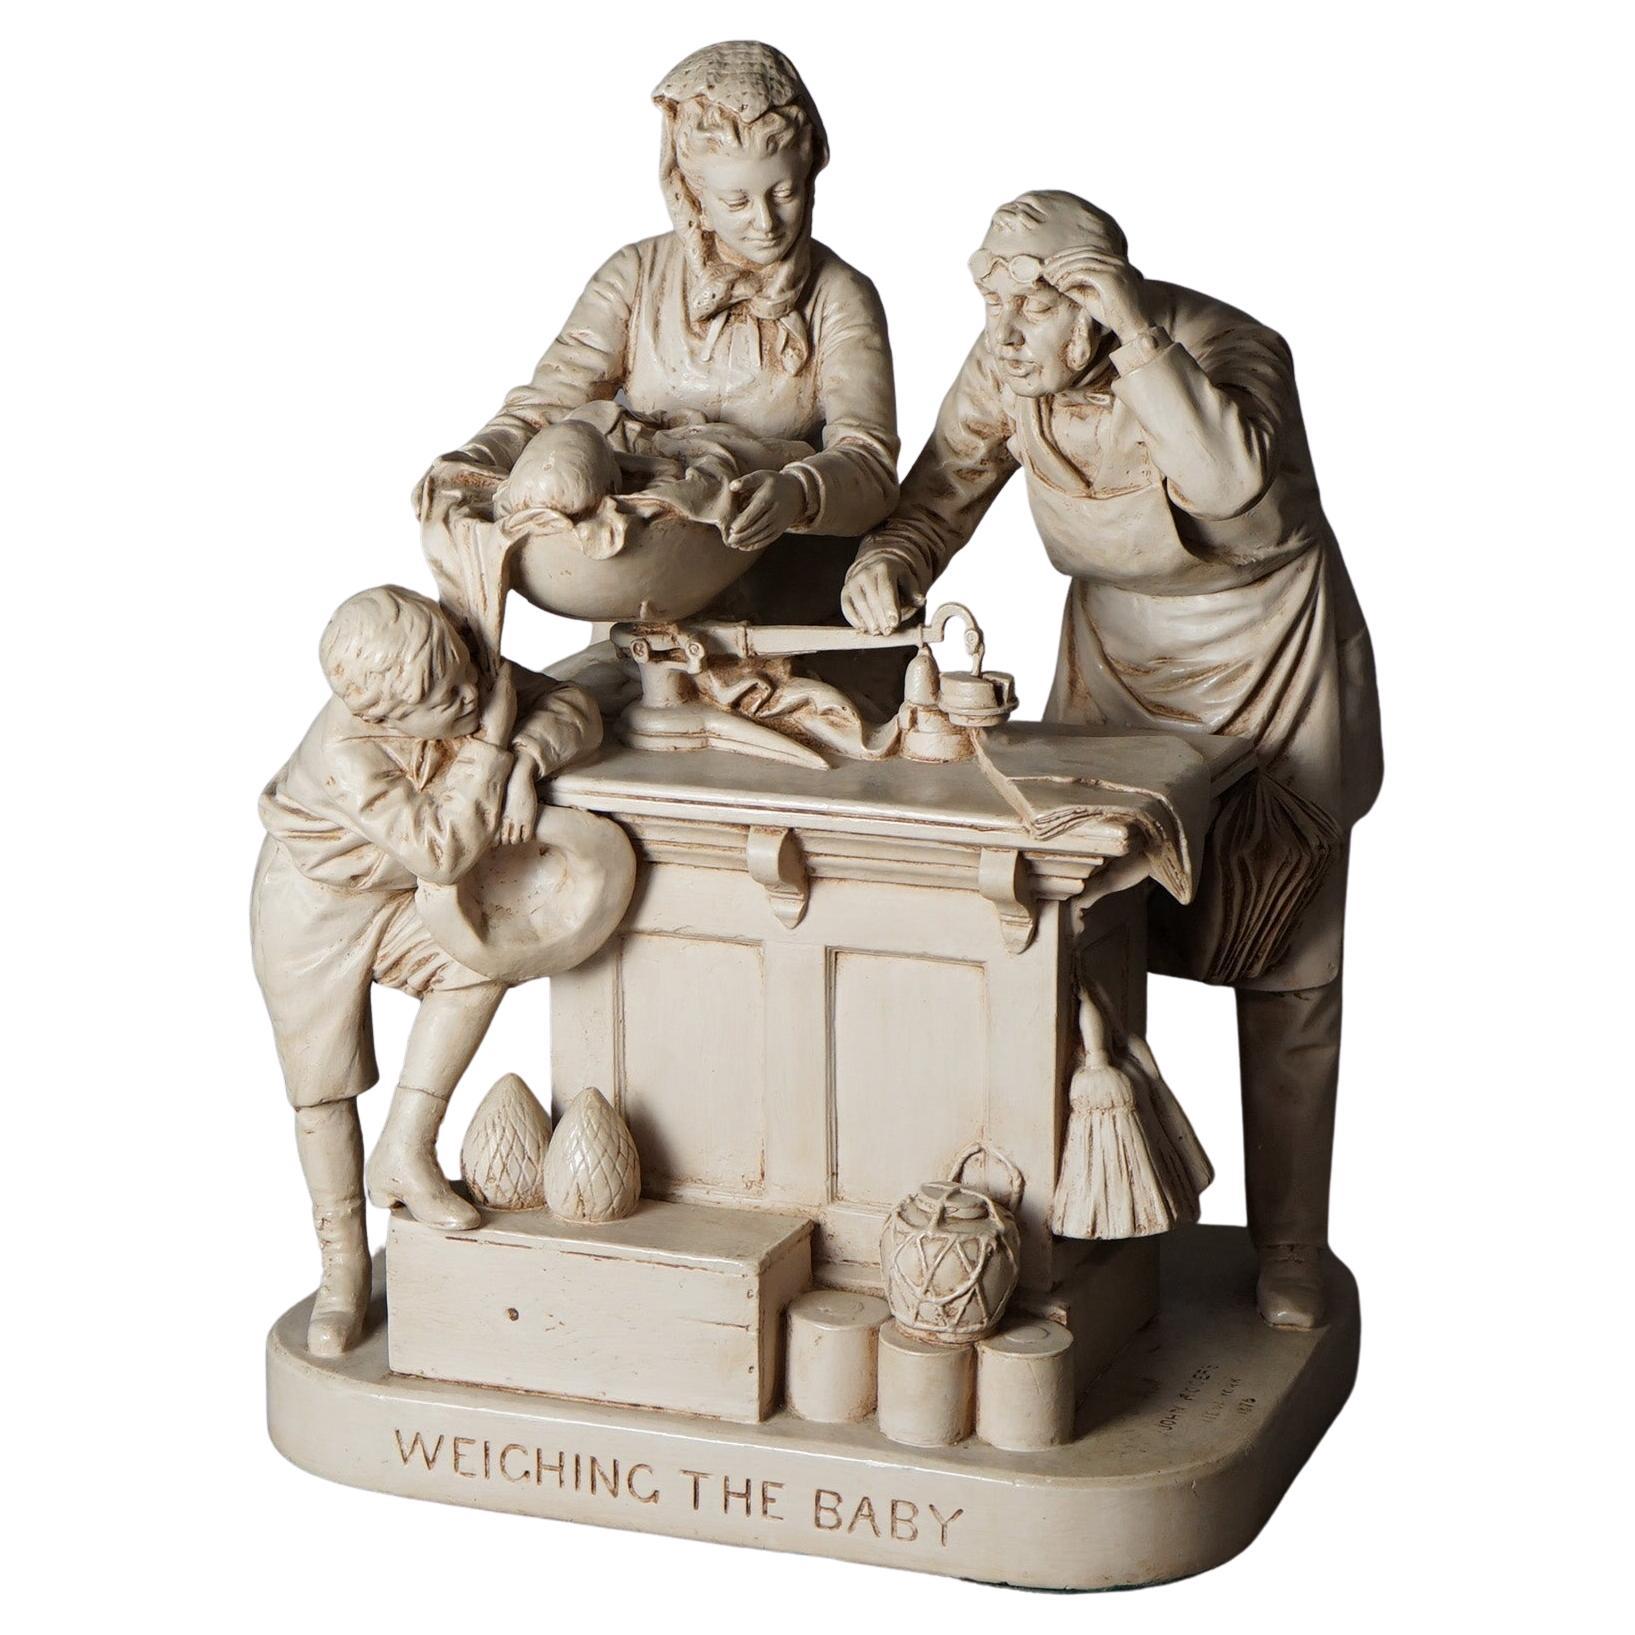 Groupe sculptural ancien « Weighing the Baby » de John Rogers, 19e siècle